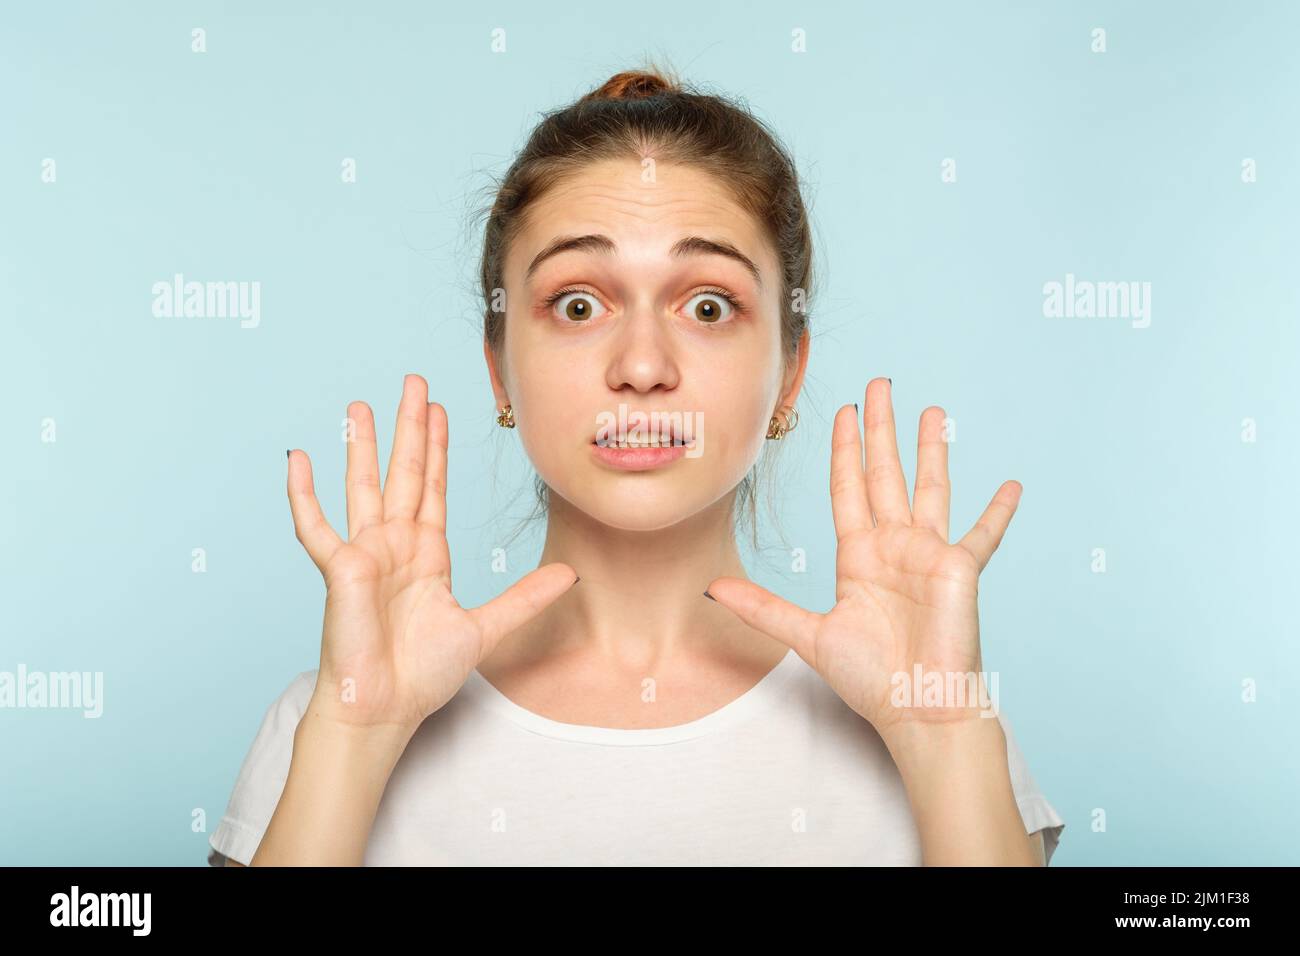 big size surprised astonished girl dimension hands Stock Photo